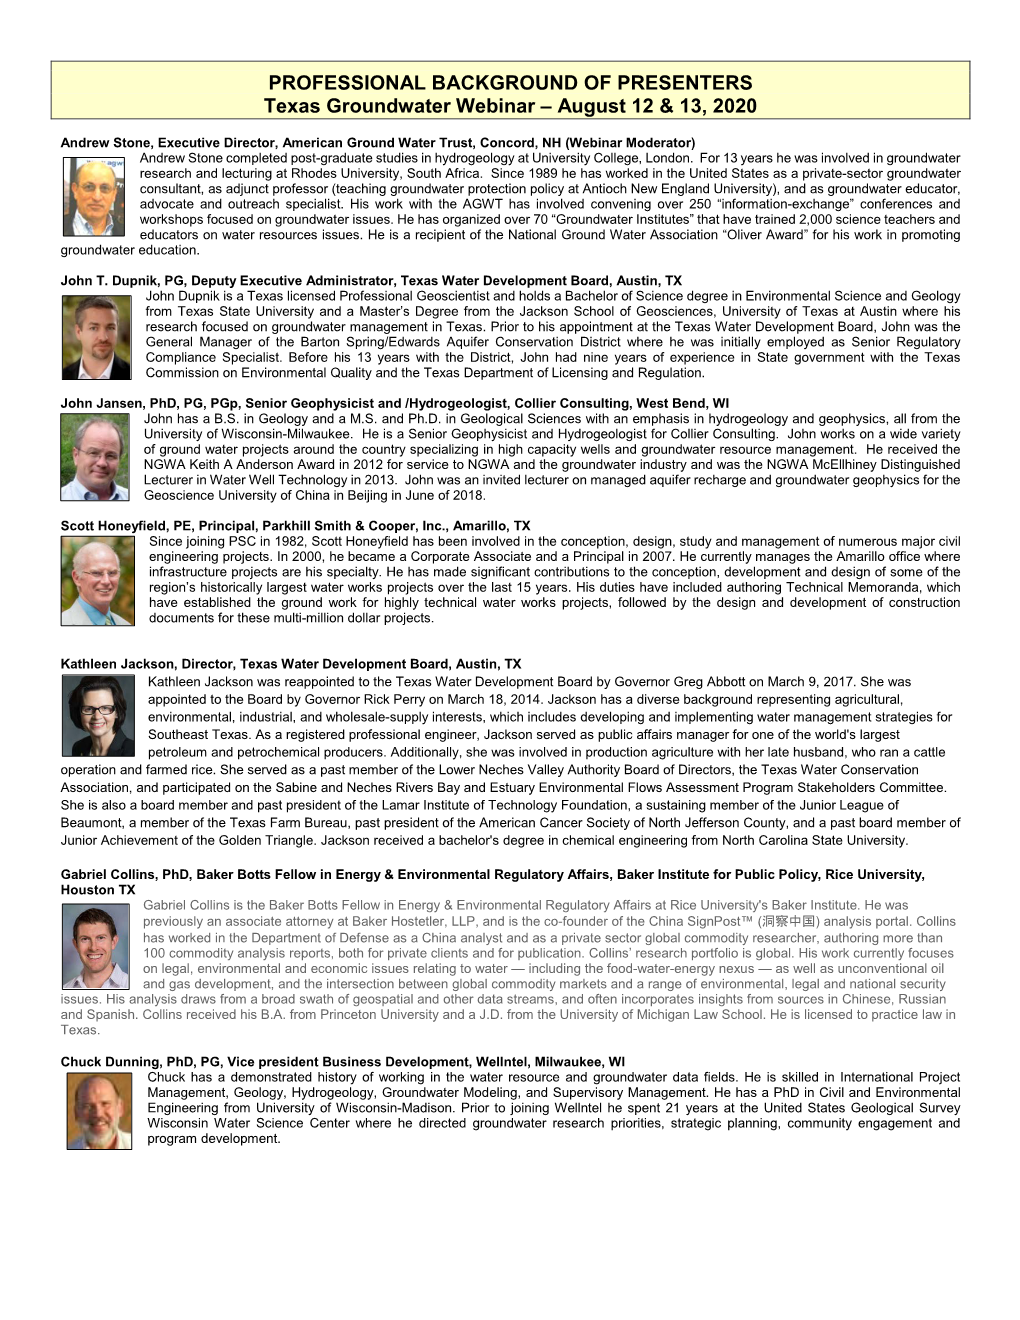 PROFESSIONAL BACKGROUND of PRESENTERS Texas Groundwater Webinar – August 12 & 13, 2020